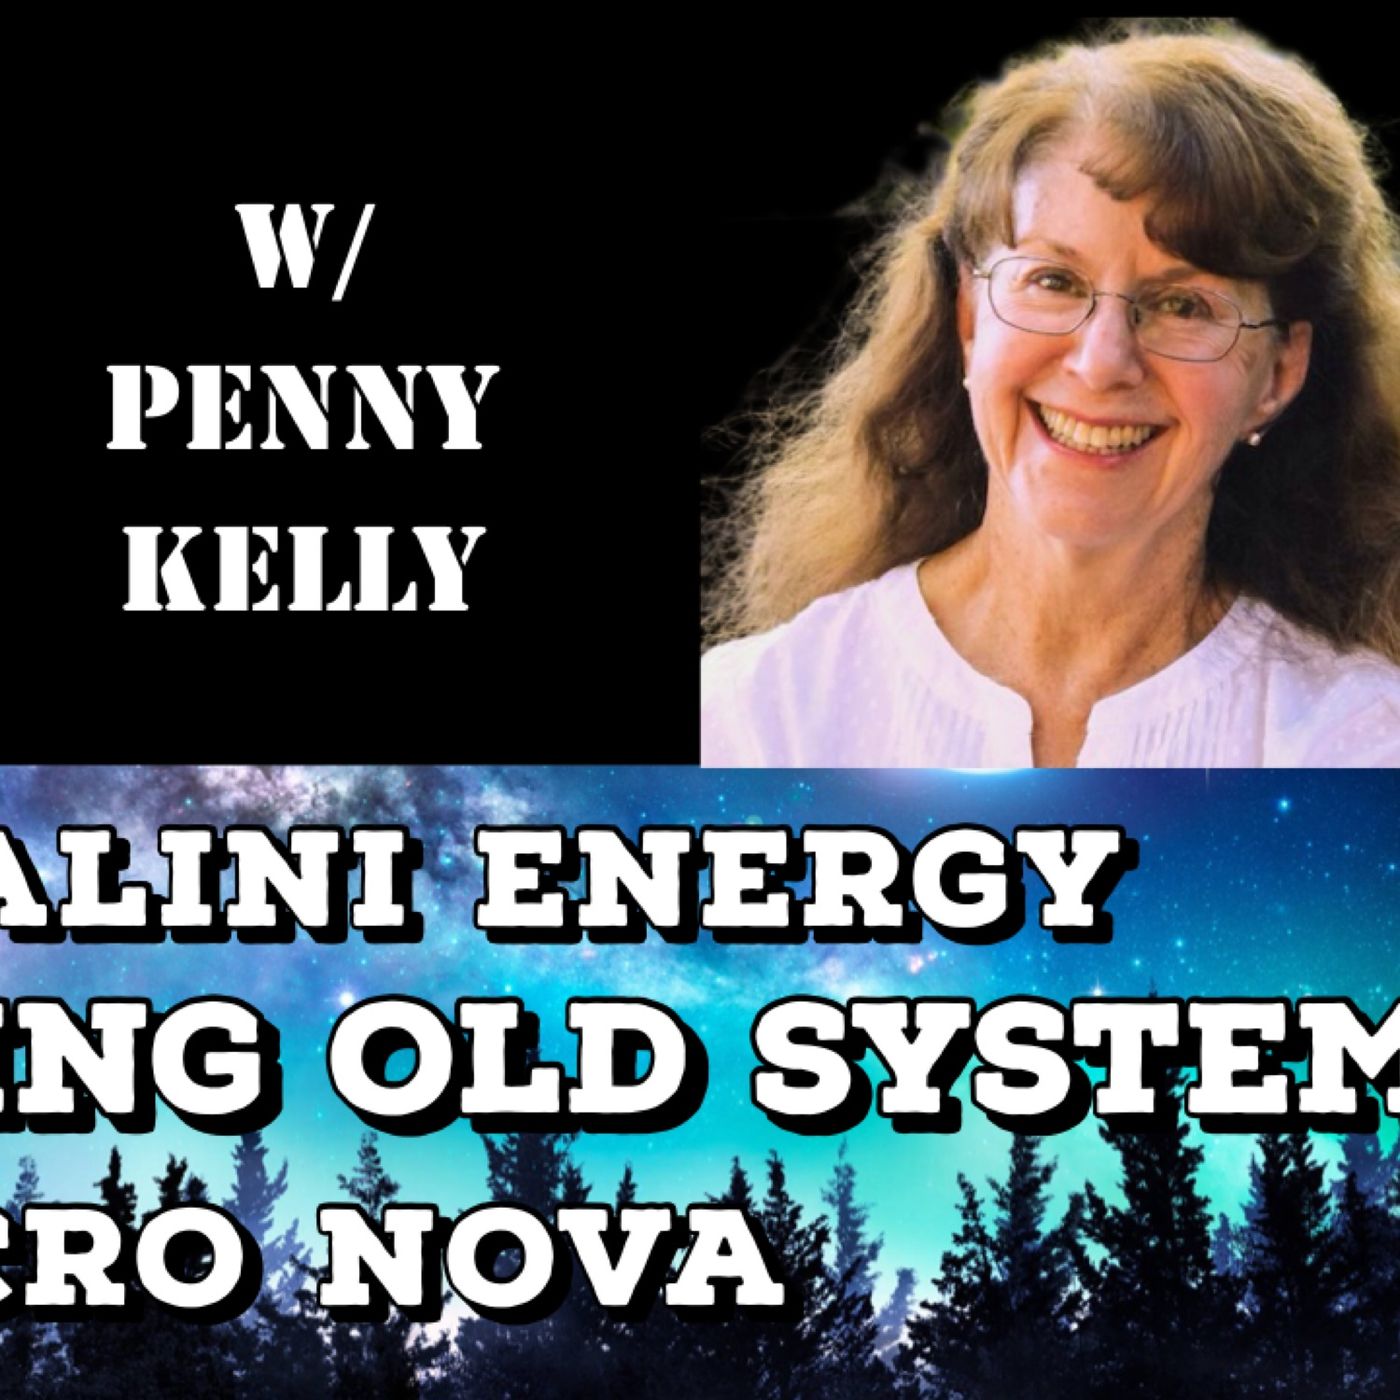 Kundalini Energy, Collapsing Old Systems, Solar Micronova with Penny Kelly